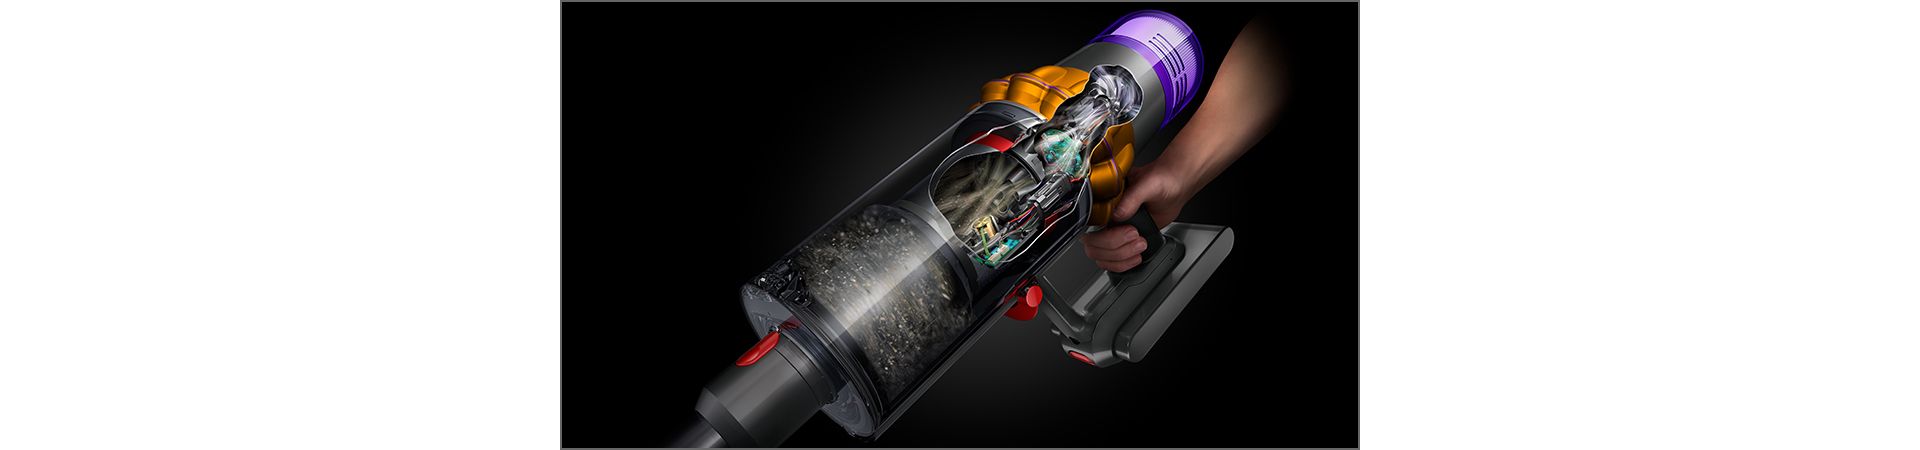 Buy Dyson V15™ Detect, Powerful Cordless Vacuum Cleaner